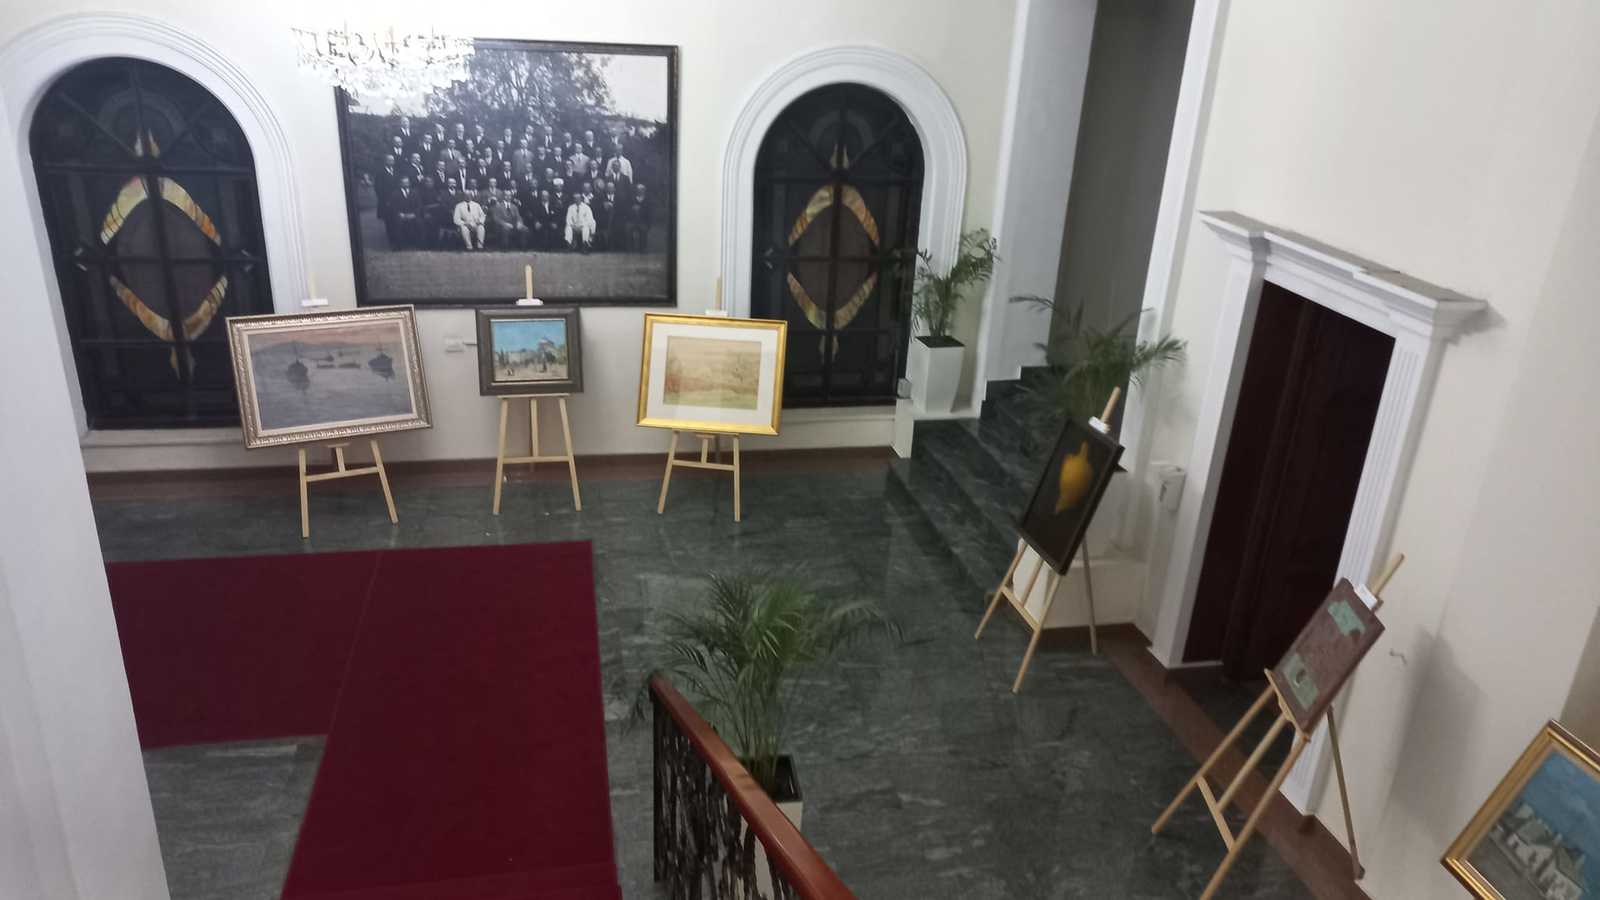 The Speaker of the National Assembly Rosen Zhelyazkov and the Speaker of the National Assembly of Albania Lindita Nikola opened the exhibition "Diplomacy and Art" in the Albanian Parliament